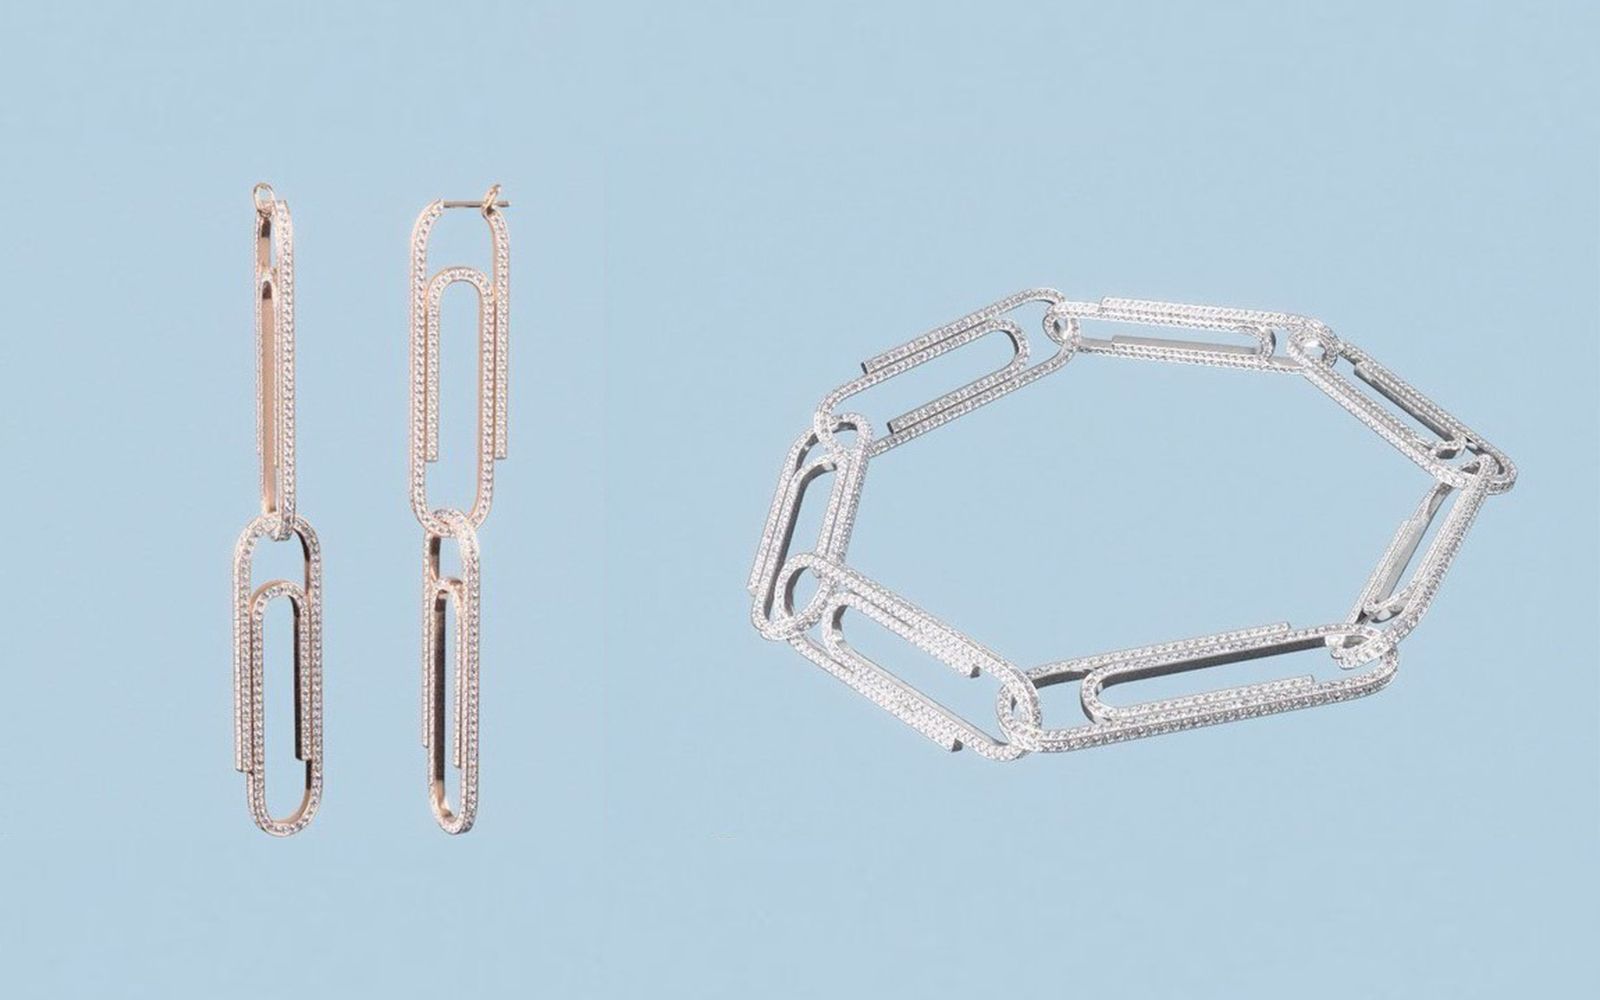 Virgil Abloh has created a luxury paperclip for Jacob & Co